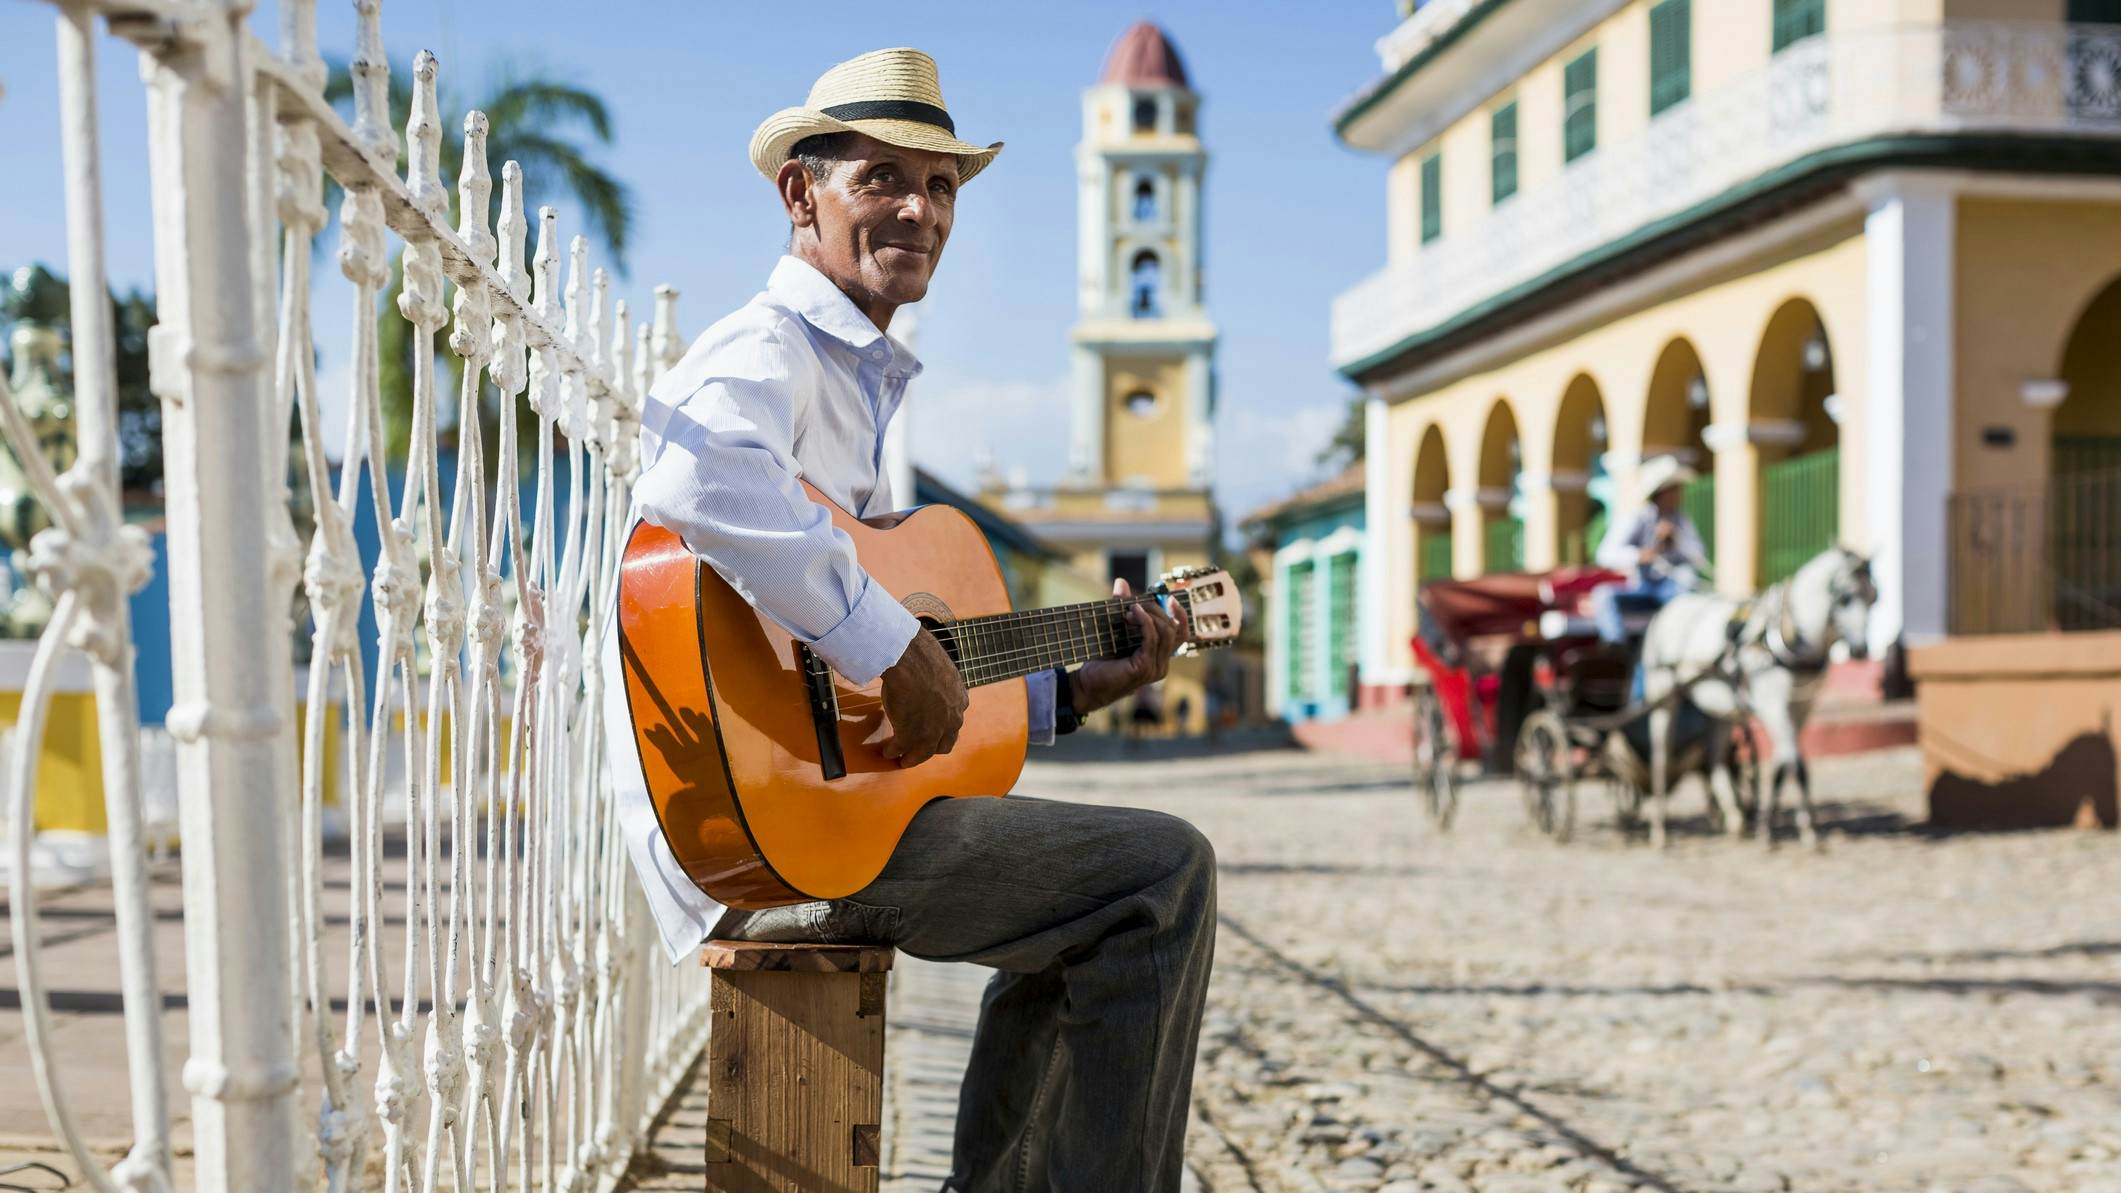 20 things to know before going to Cuba - Lonely Planet